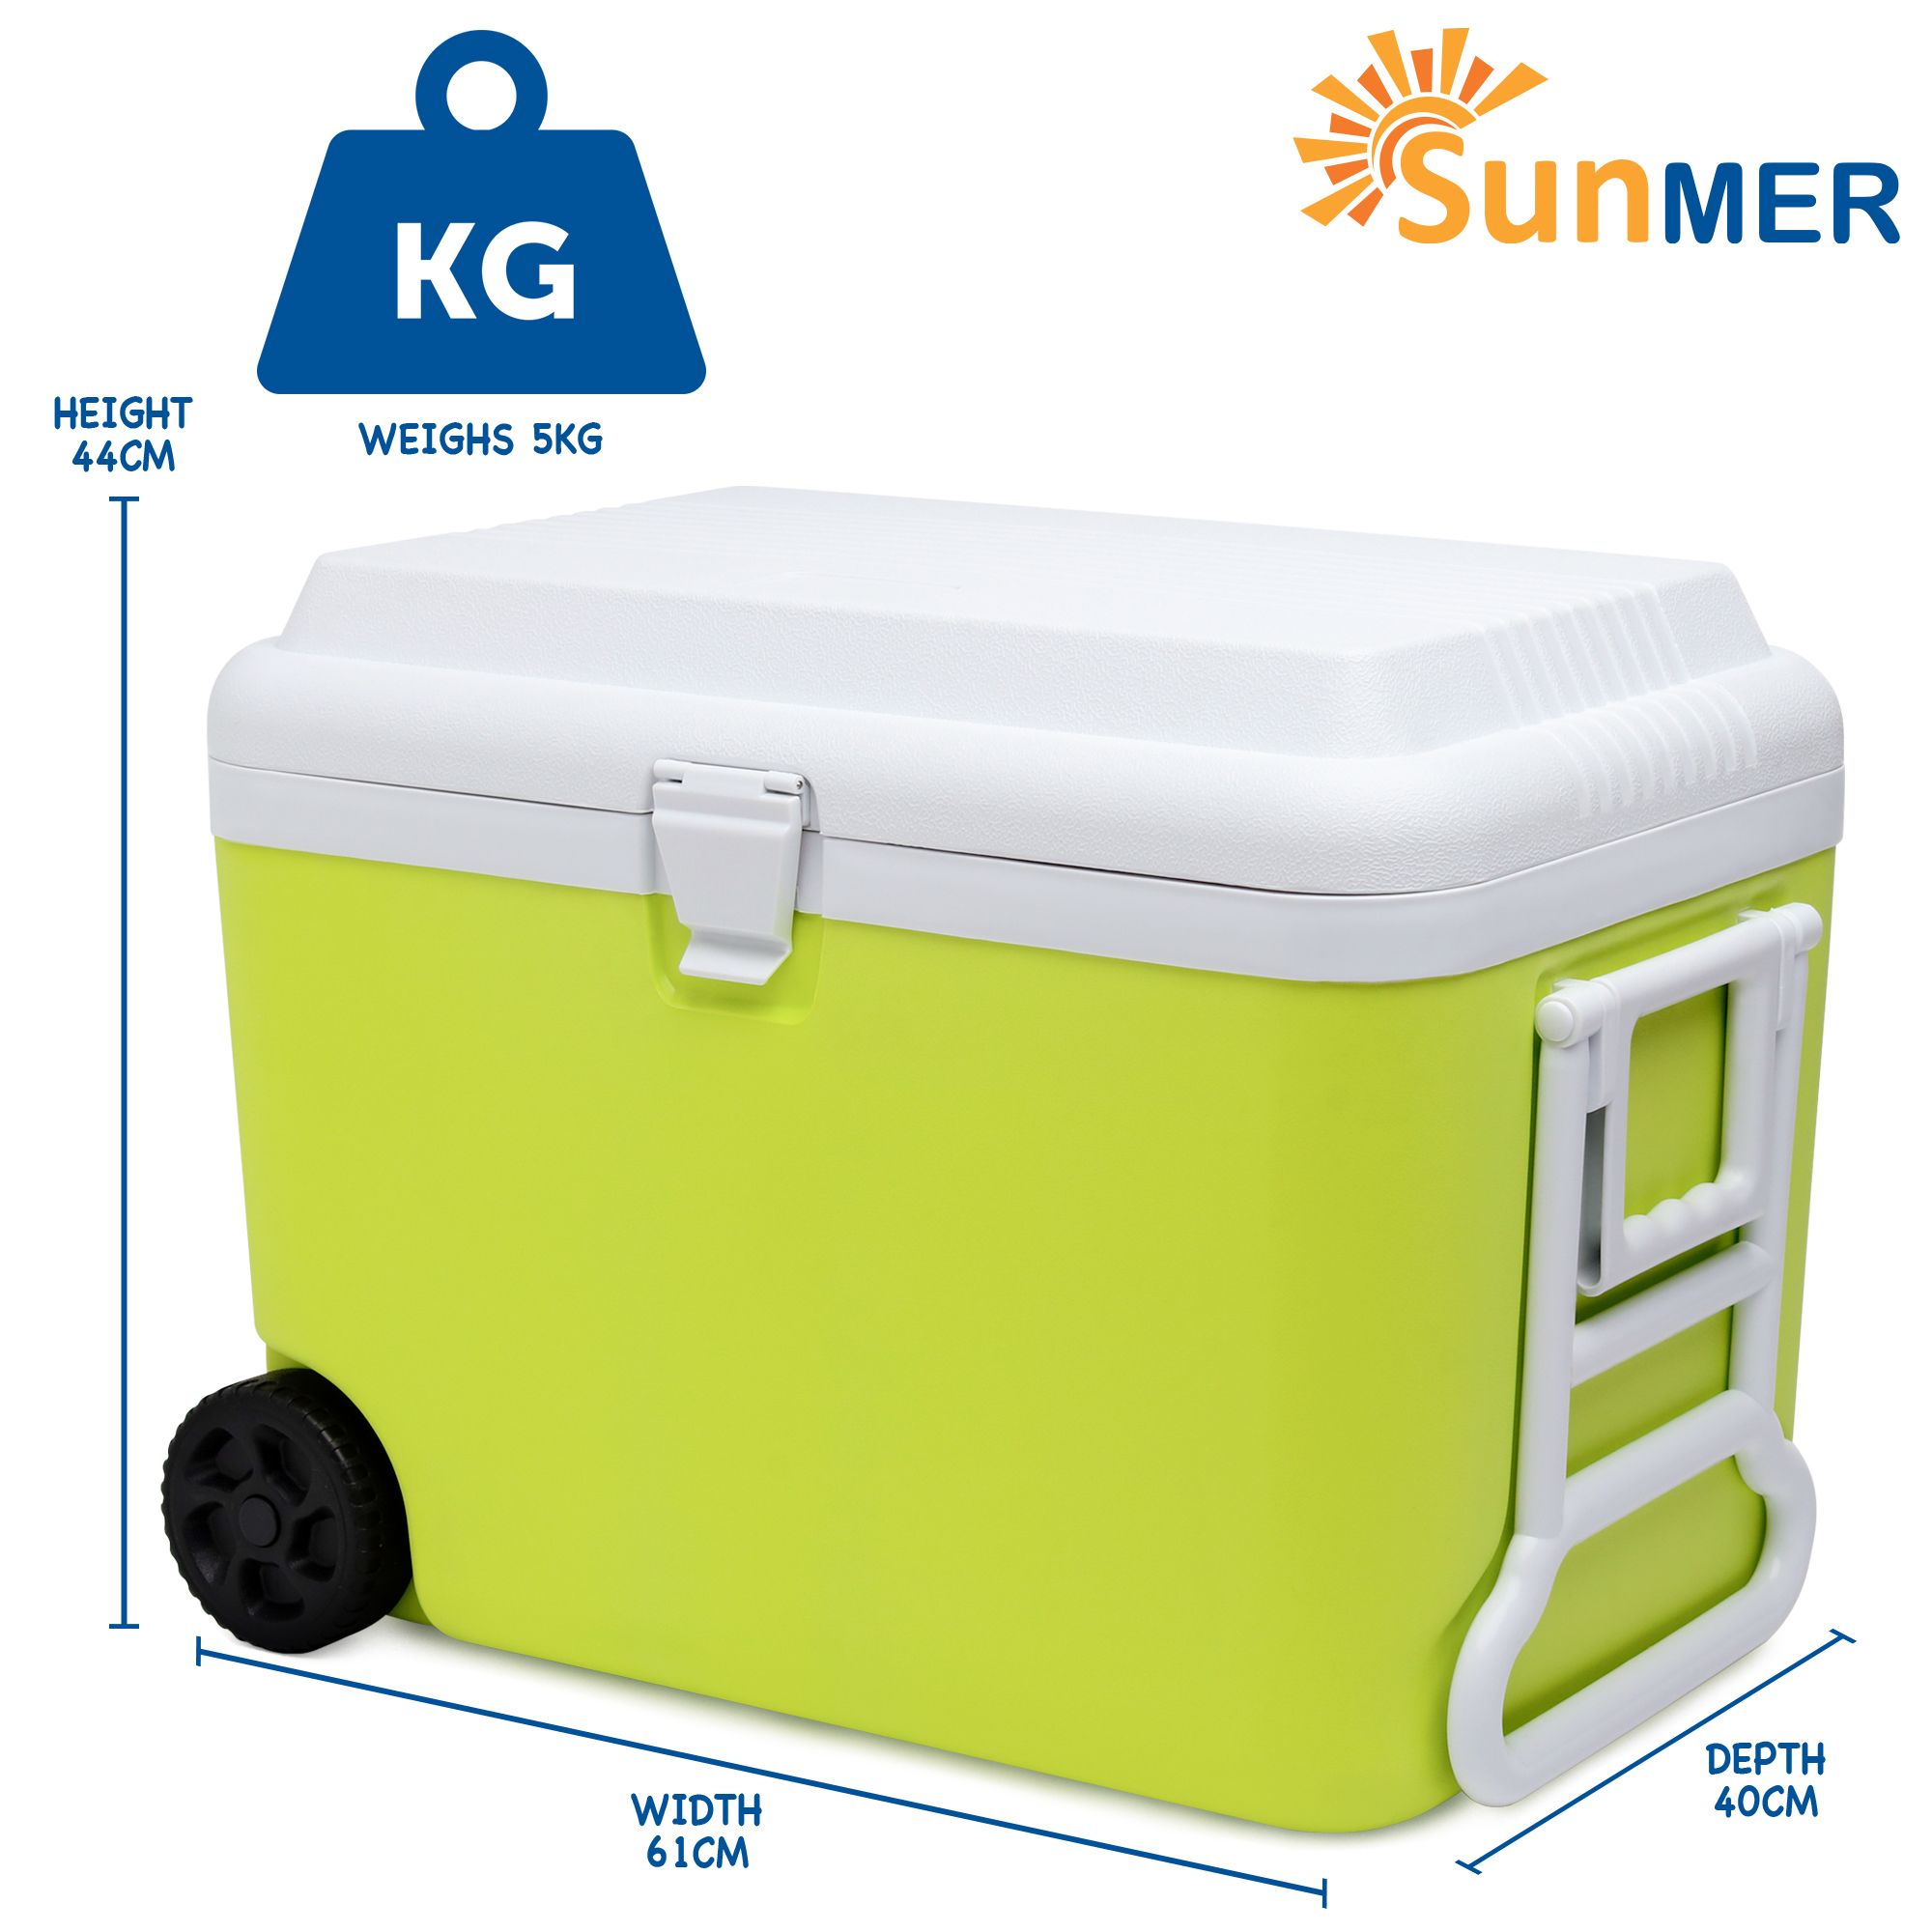 SUNMER 50L Cooler Box with Ice Packs - Lime & White